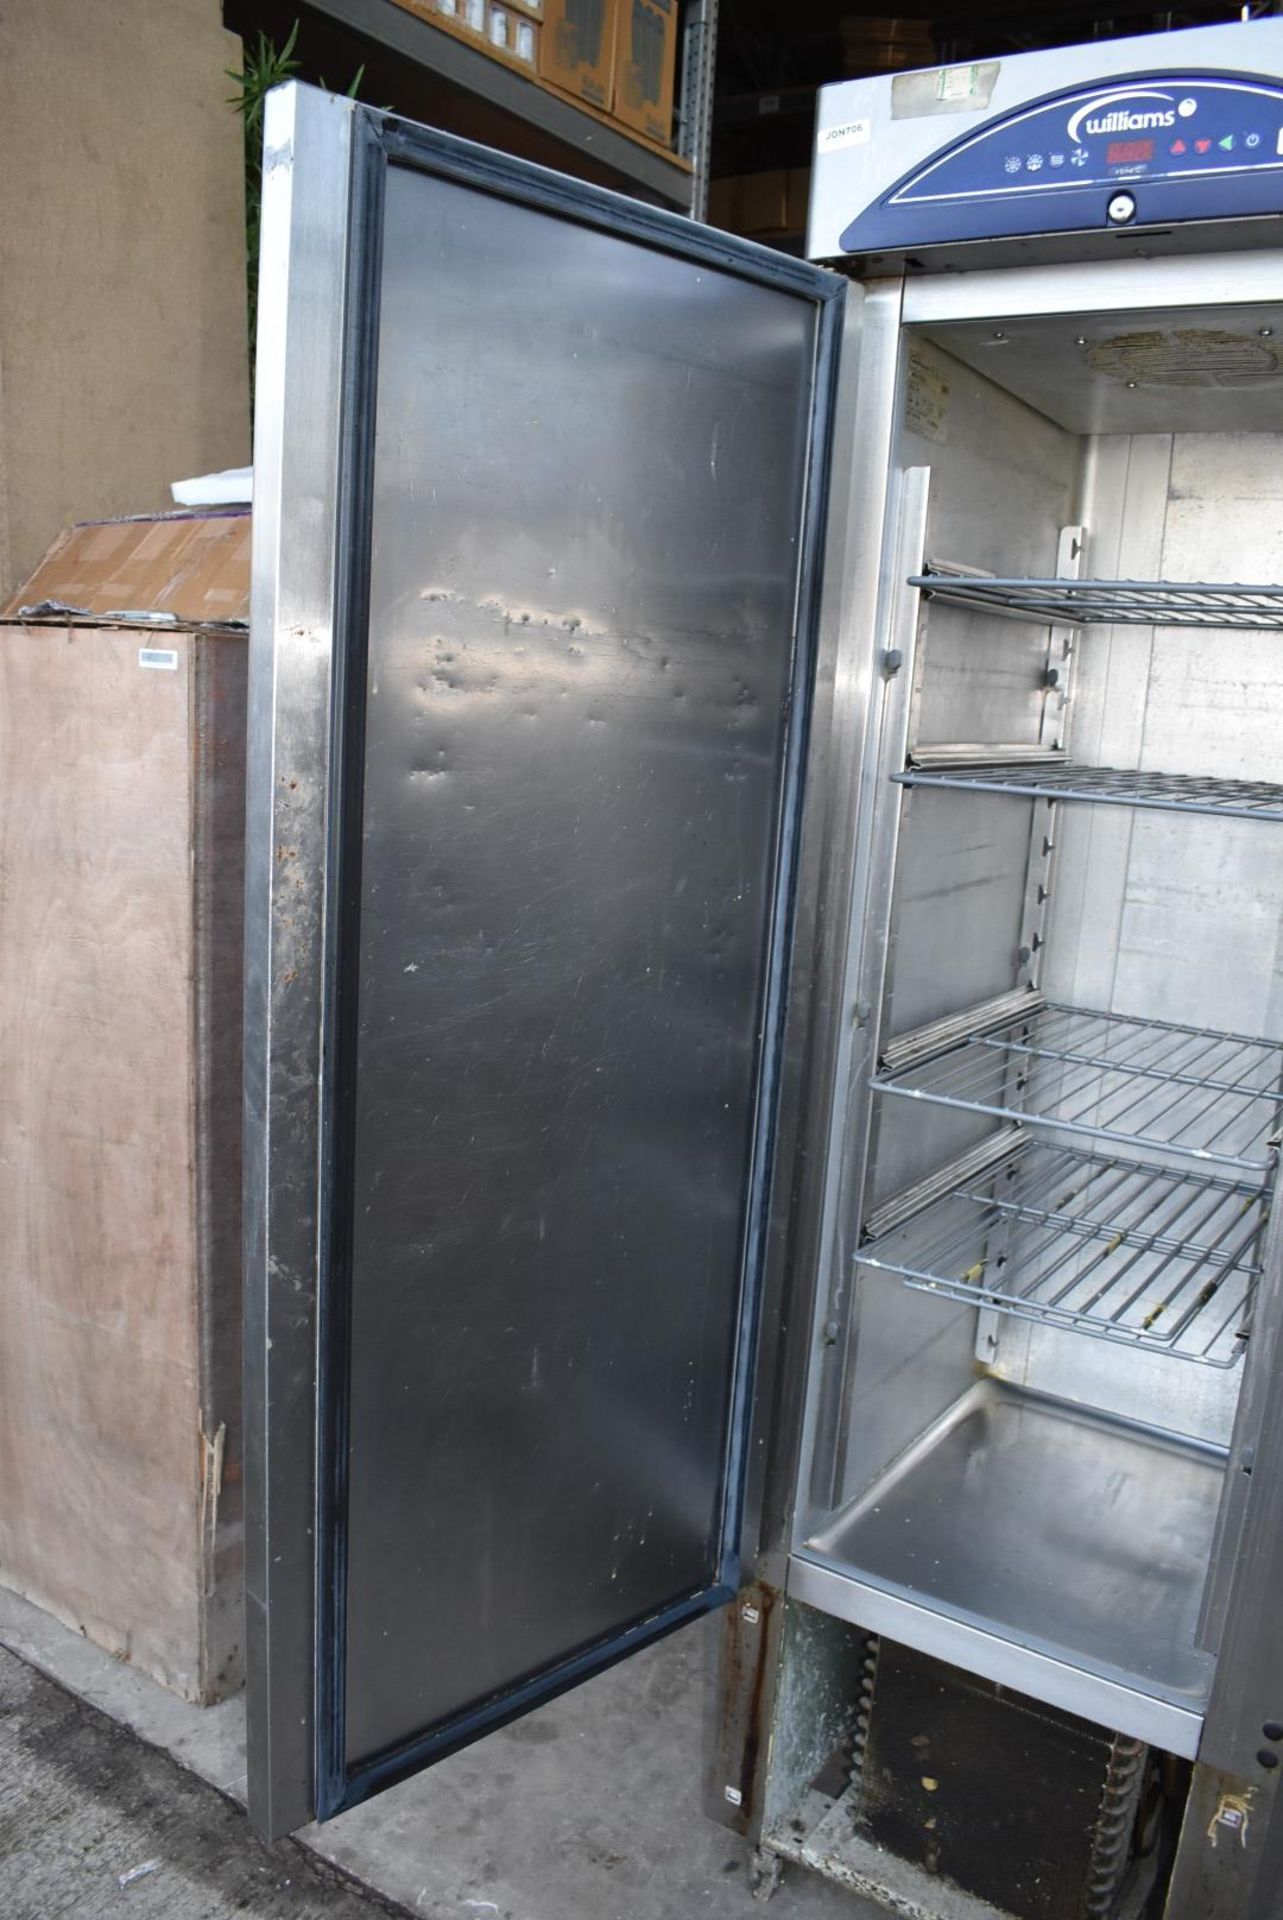 1 x Williams HZ12 Upright Single Door Refrigerator - Recently Removed From a Working Environment - - Image 5 of 8